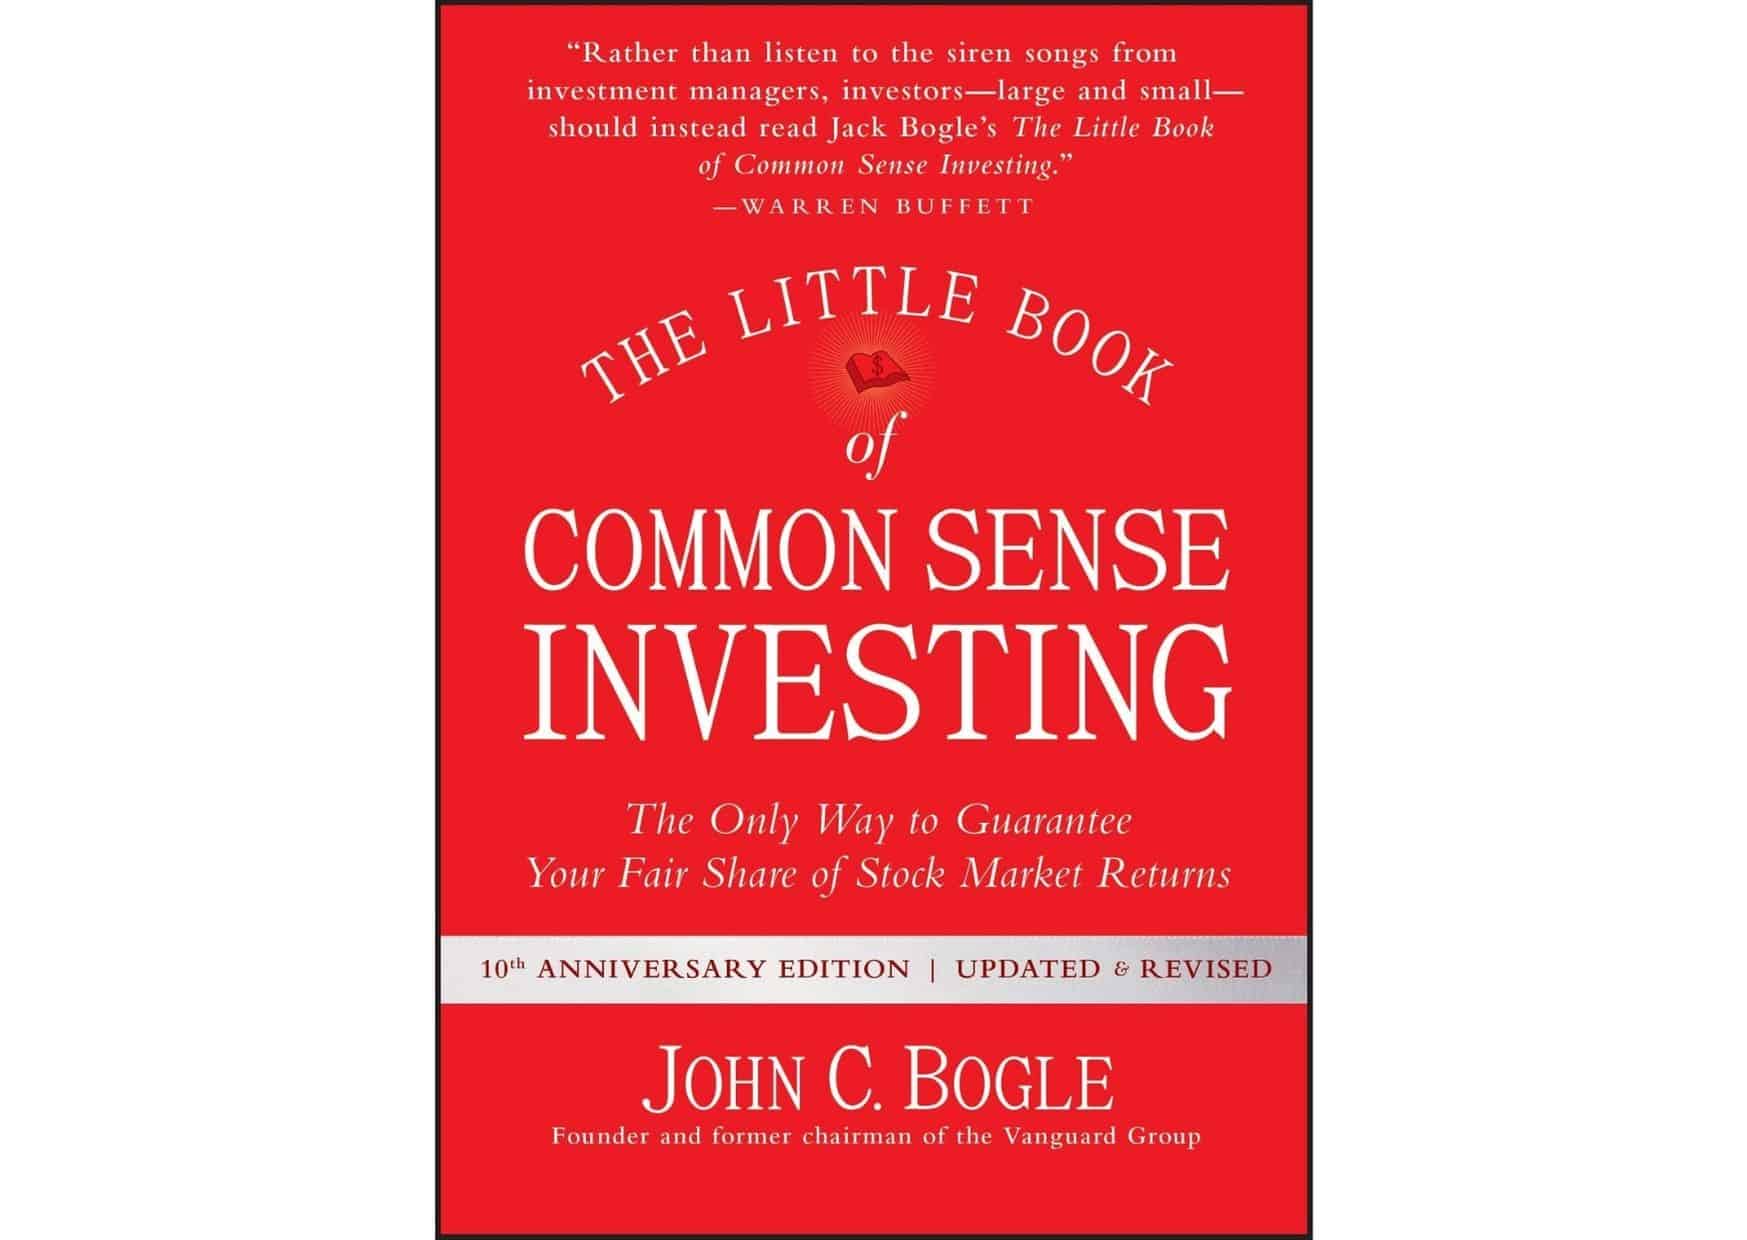 25 Important Investment Books Every Entrepreneur Needs to Read